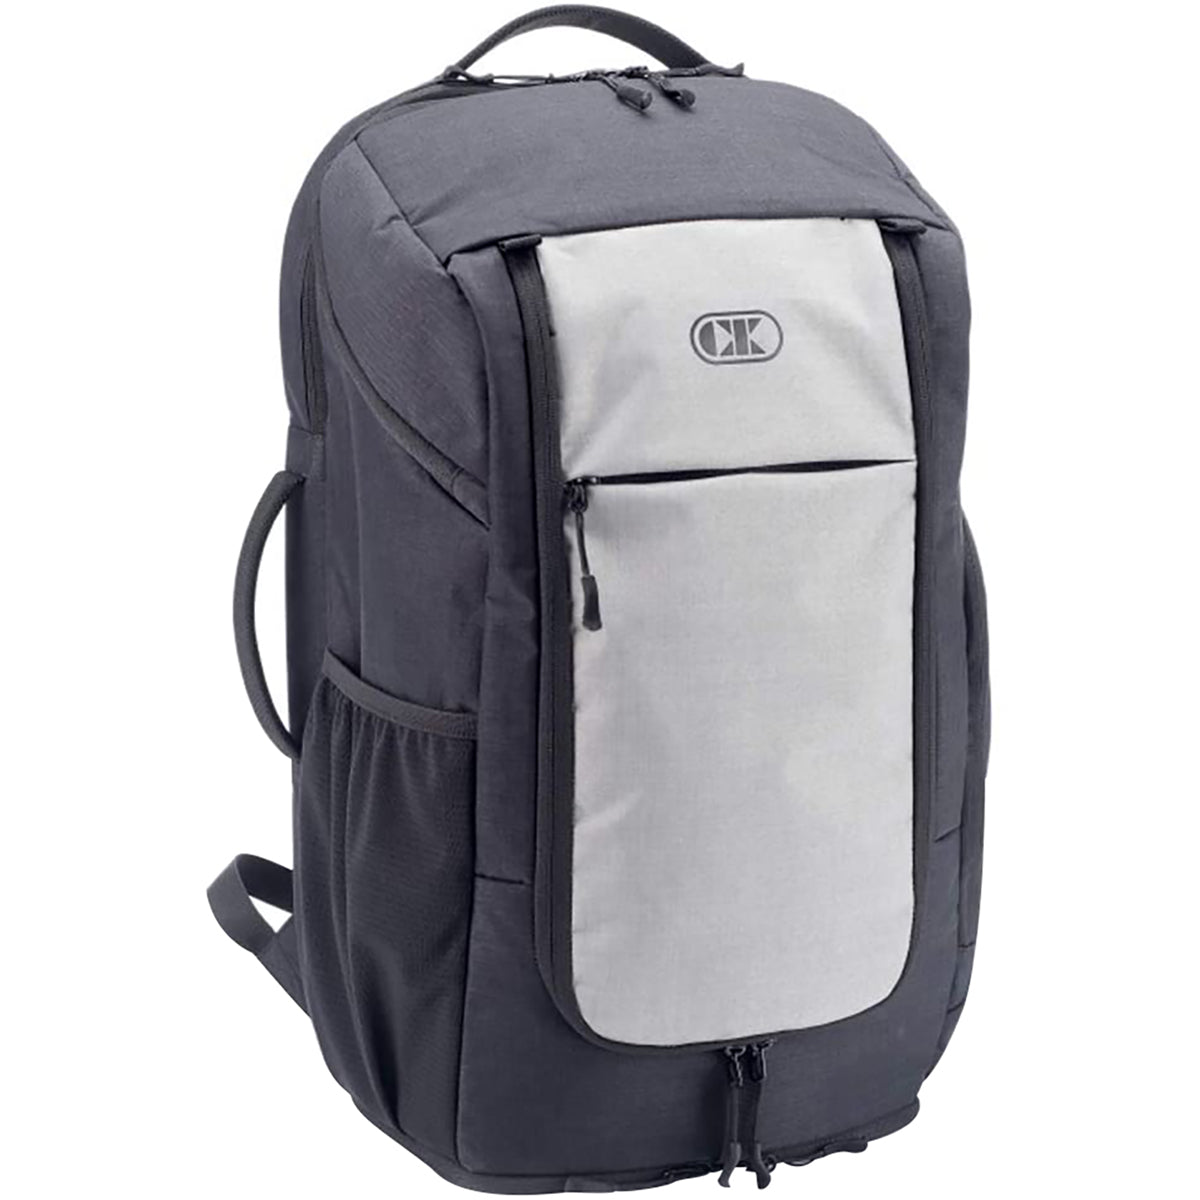 Cliff Keen "The Beast" Athletic Backpack - Black Cliff Keen